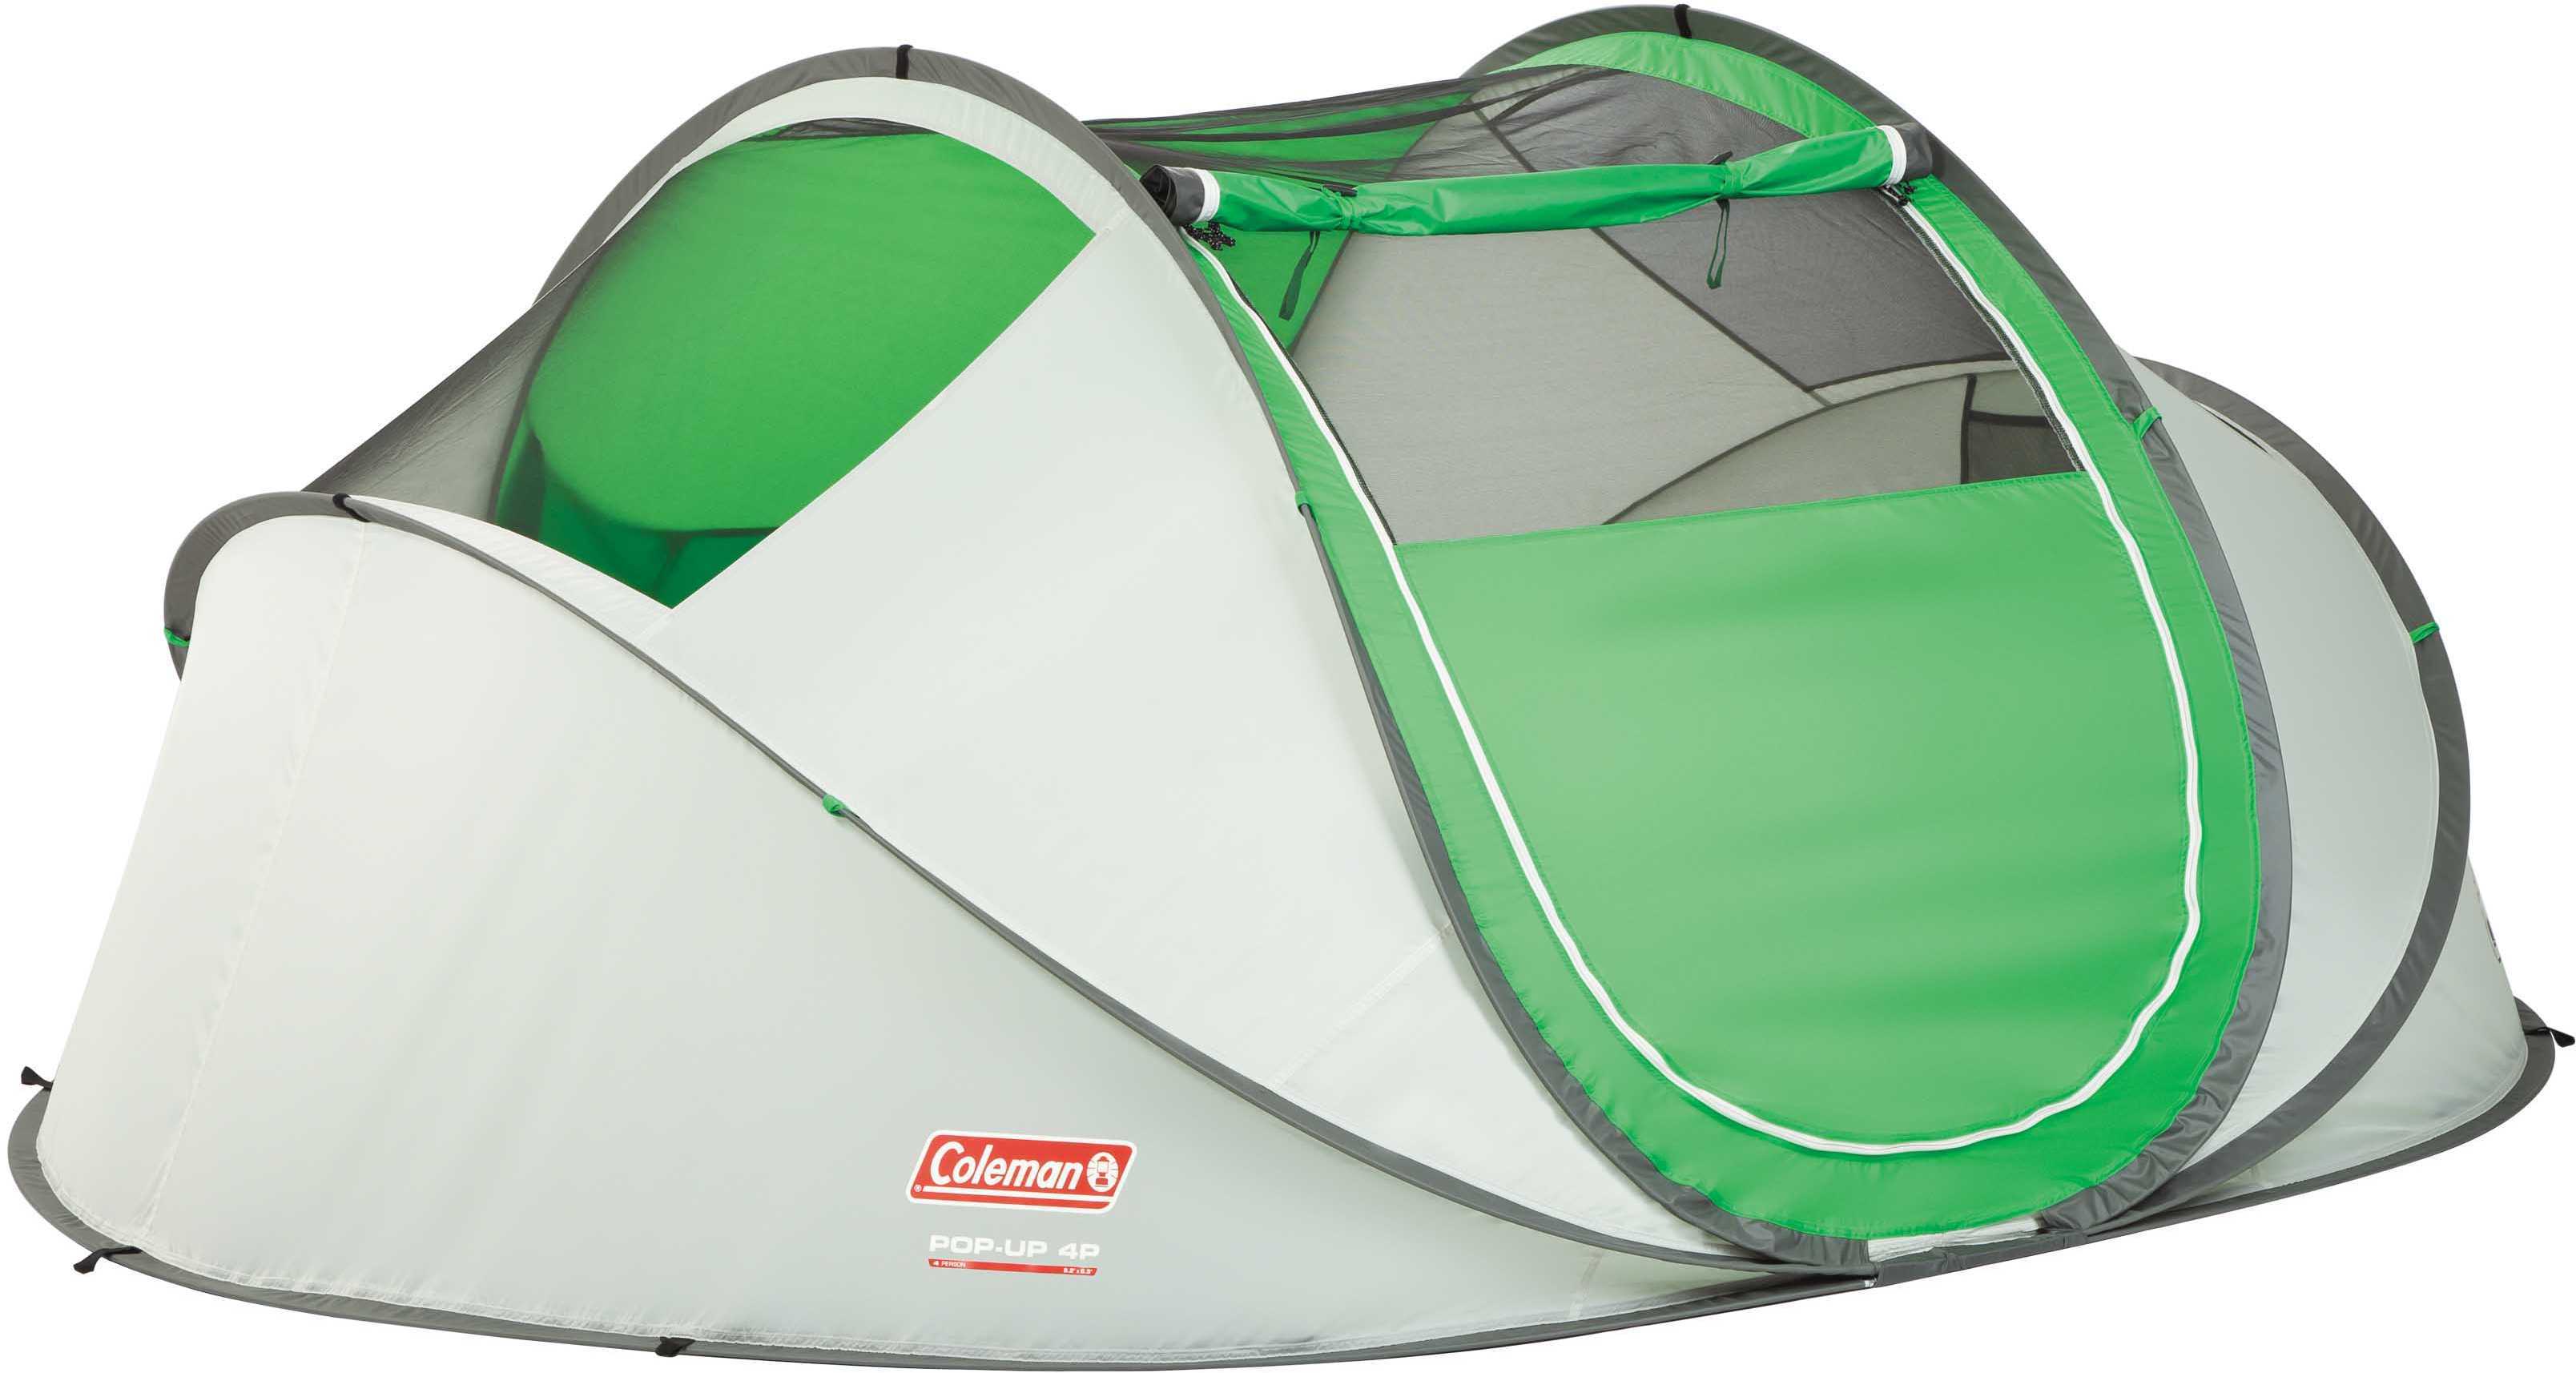 Coleman Pop-Up Tent 4 Person Md: 2000014782